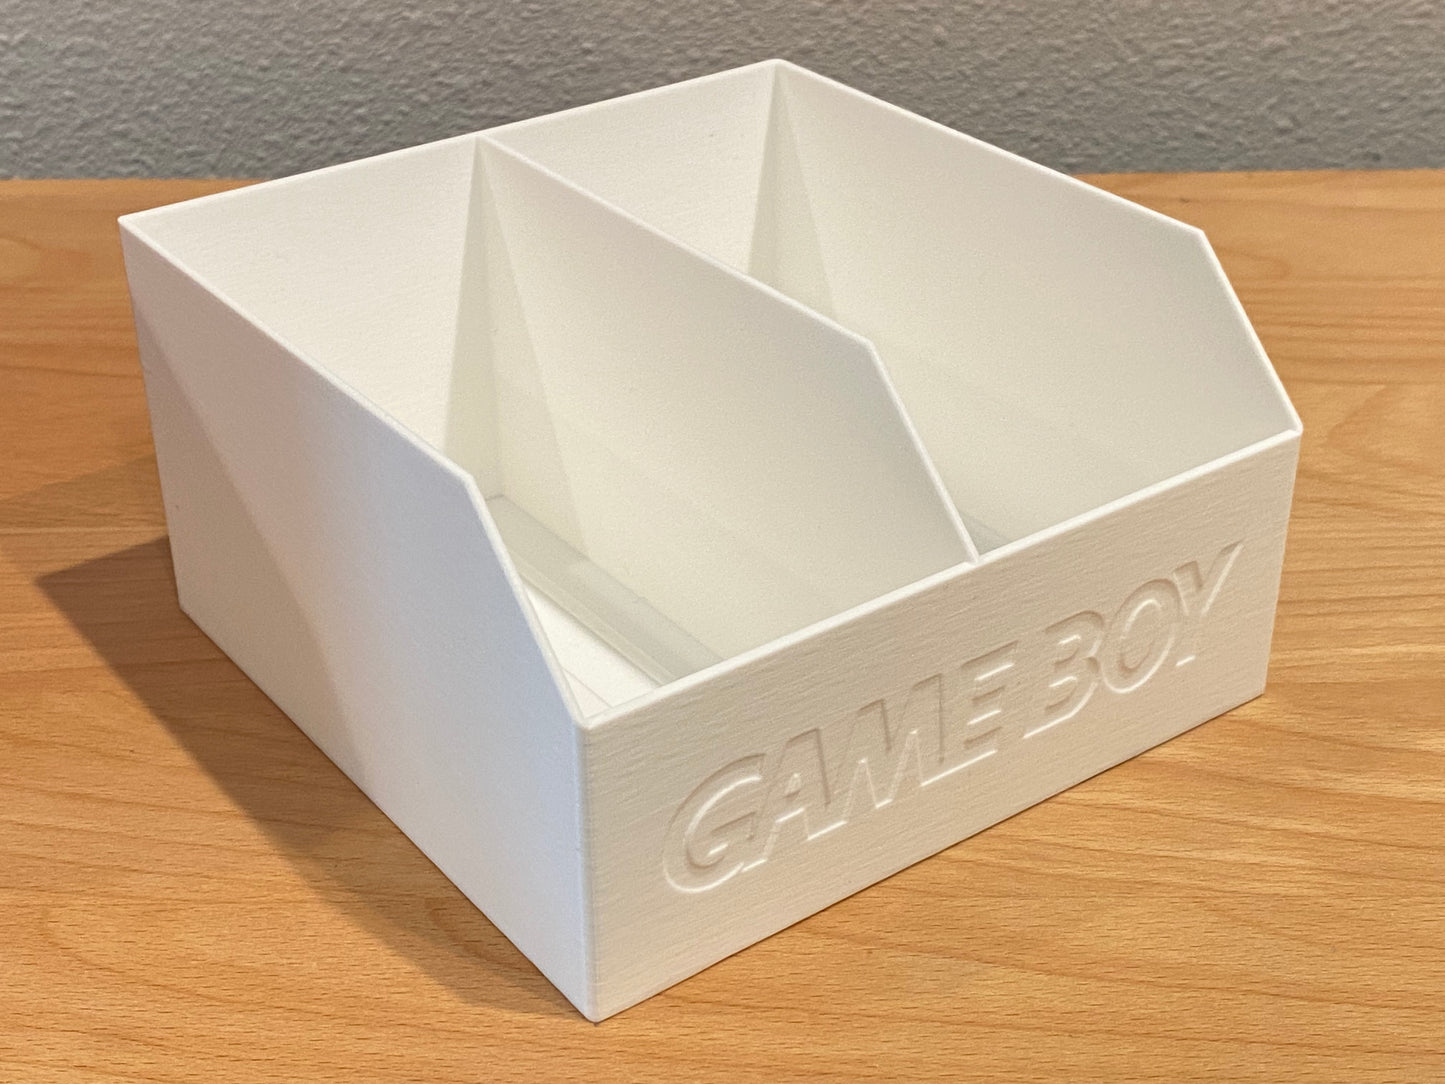 Game Boy Cartridge Storage Tray for OEM Cases (3 Sizes)